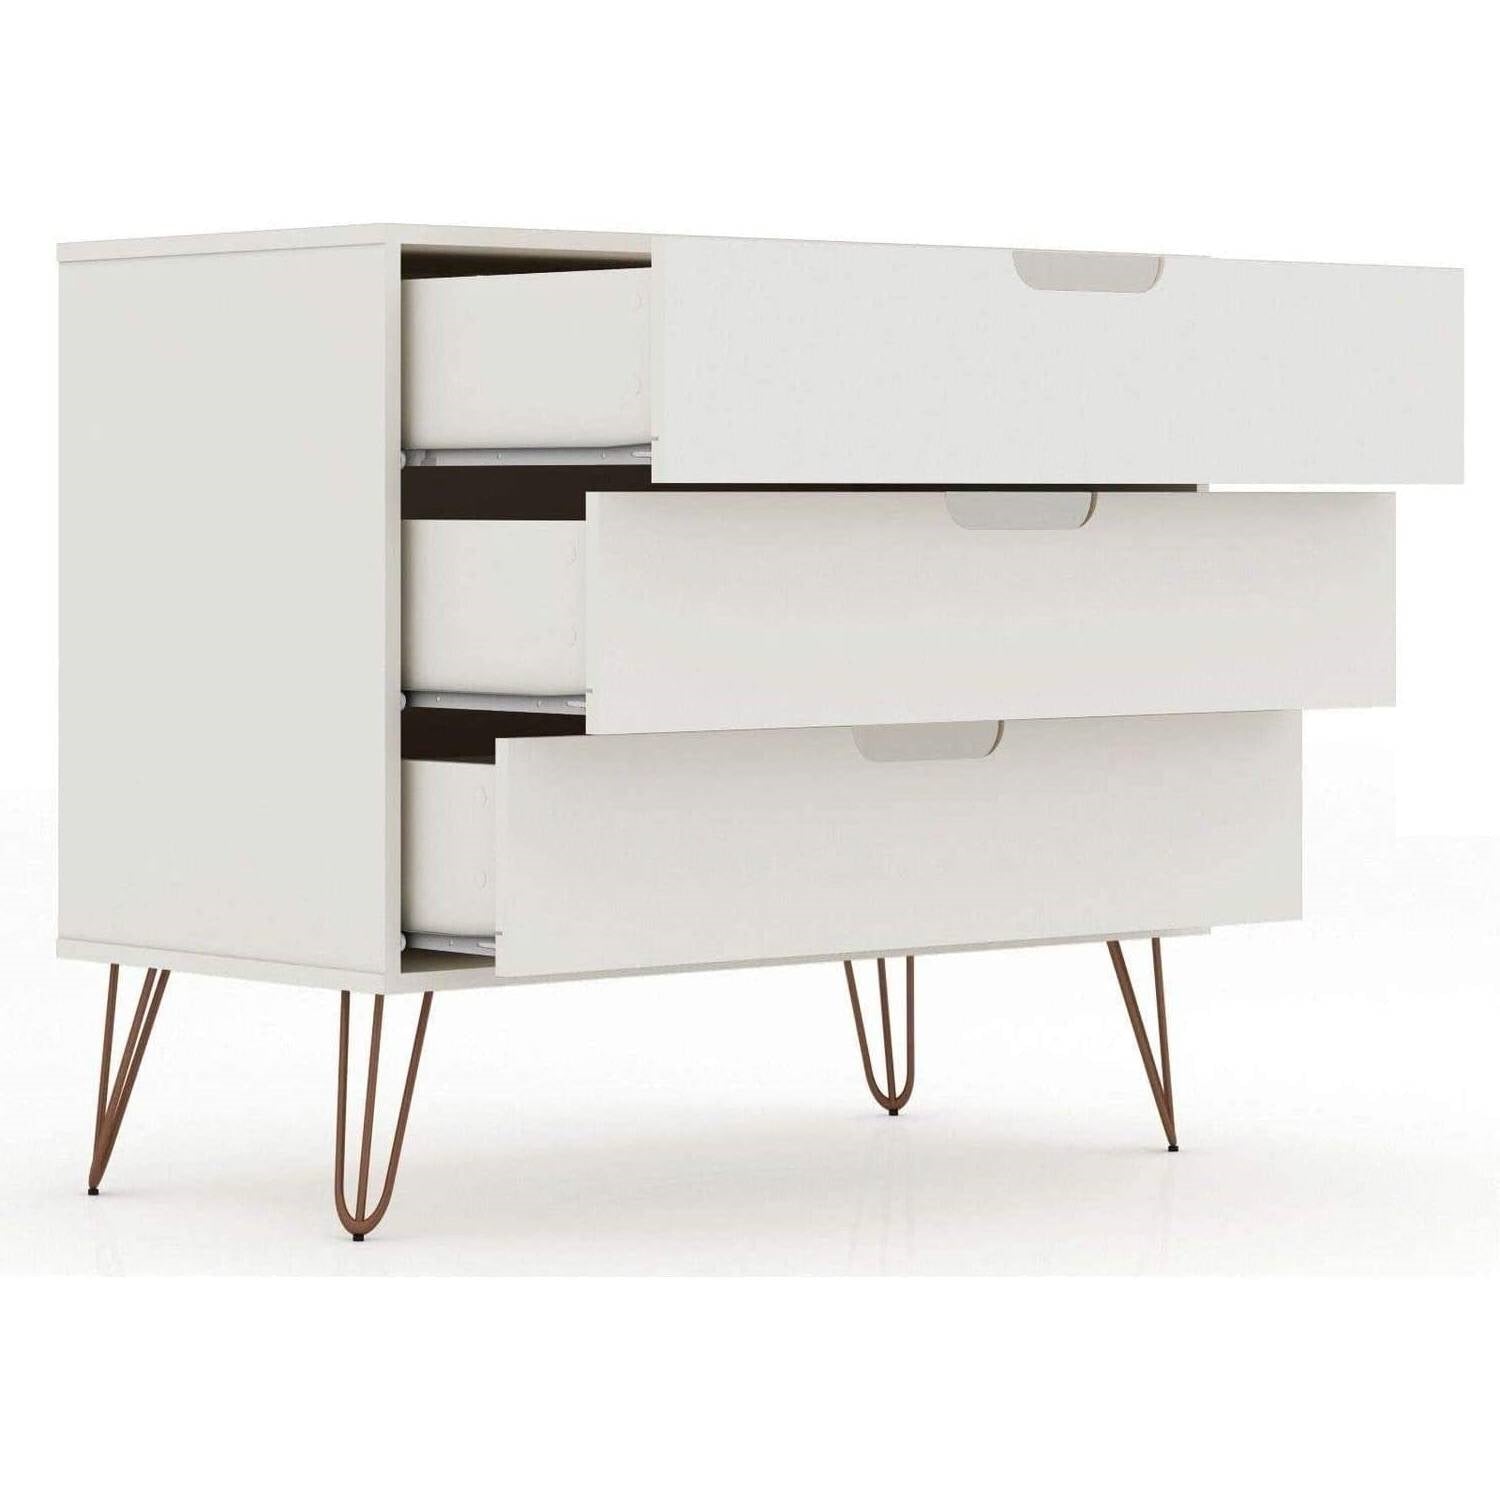 Bedroom > Nightstand And Dressers - Modern Scandinavian Style Bedroom 3-Drawer Dresser In Off-White Finish